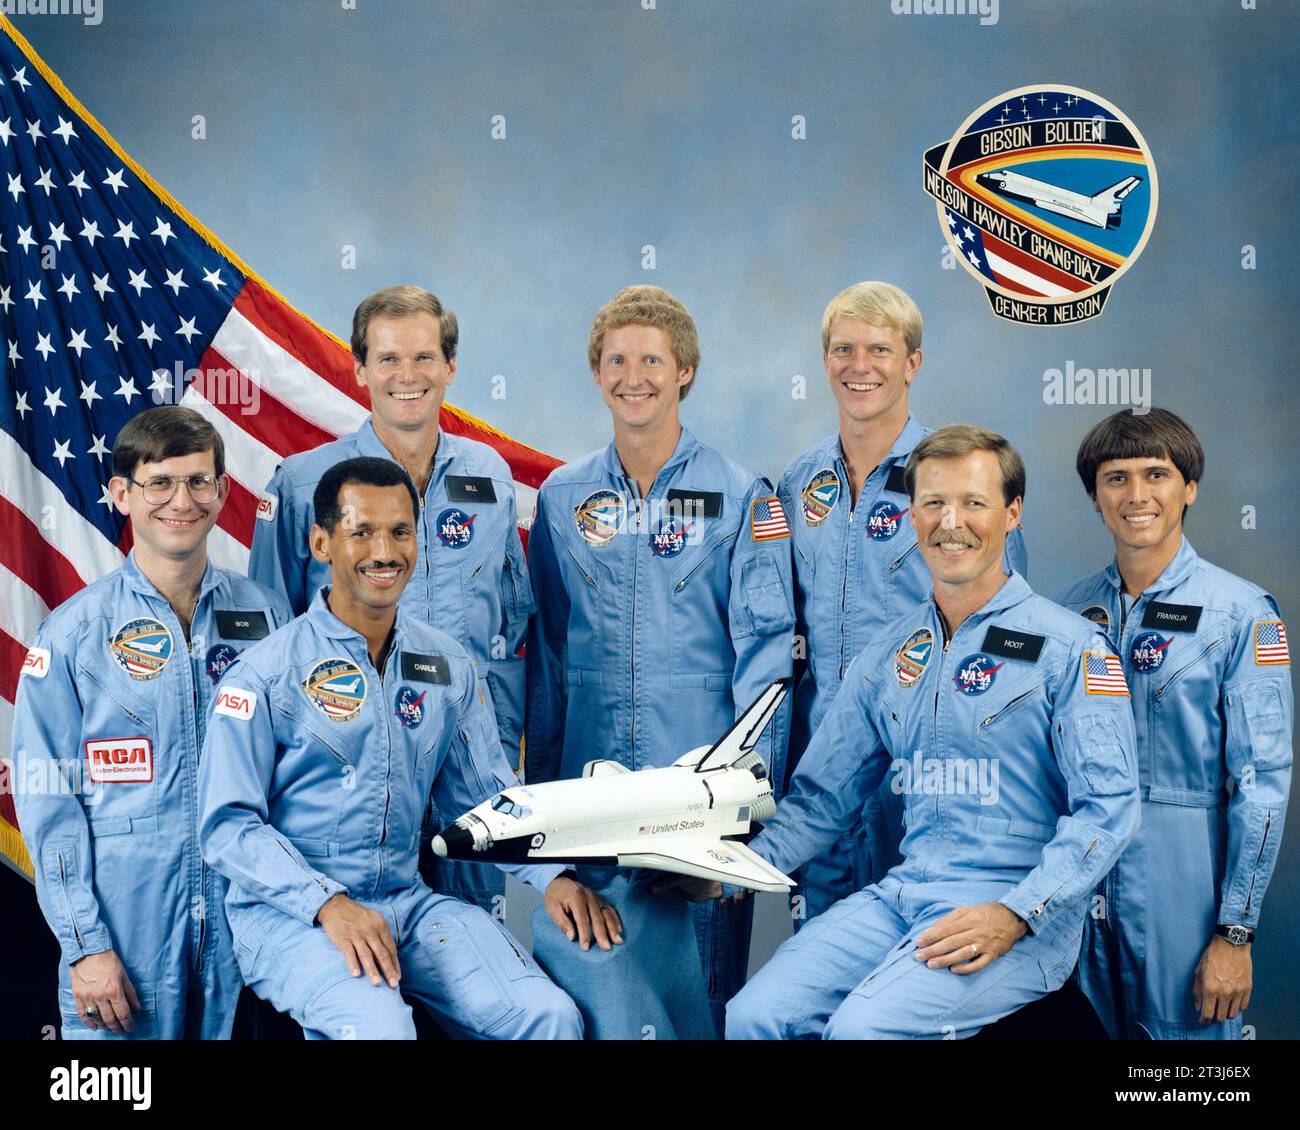 STS-61-C Crew, The Space Shuttle Columbia's STS-61-C crew pose for their official portrait. Robert L. Gibson (second right) was the mission commander; and Charles F. Bolden (second left) was the pilot. Mission specialists were Steven A. Hawley (center), George D. Nelson (rear right), and Franklin R. Chang-Diaz (right). Payload specialists were Robert J. Cenker (left), representing RCA; and Bill Nelson (left rear) Stock Photo